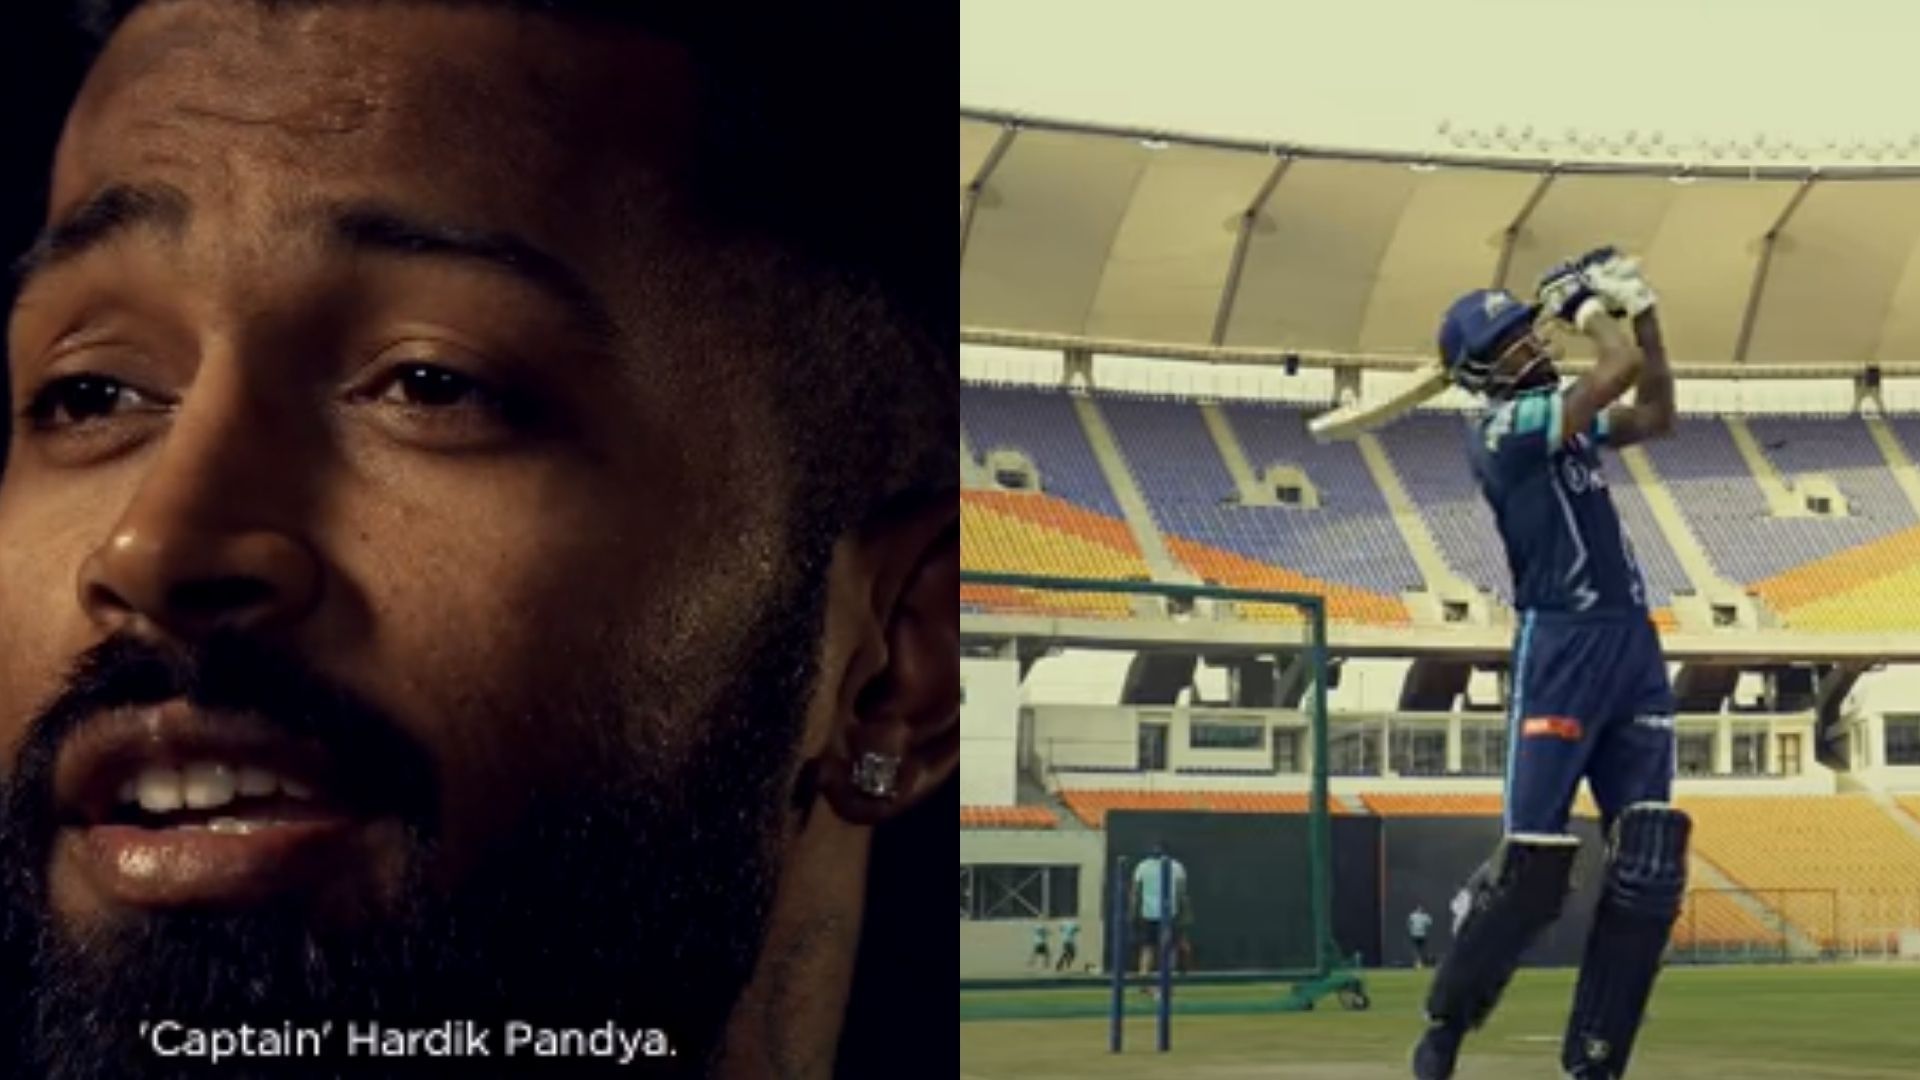 Hardik Pandya gave an inspirational message to the fans ahead of their IPL opener on Monday (P.C.: GT Twitter)